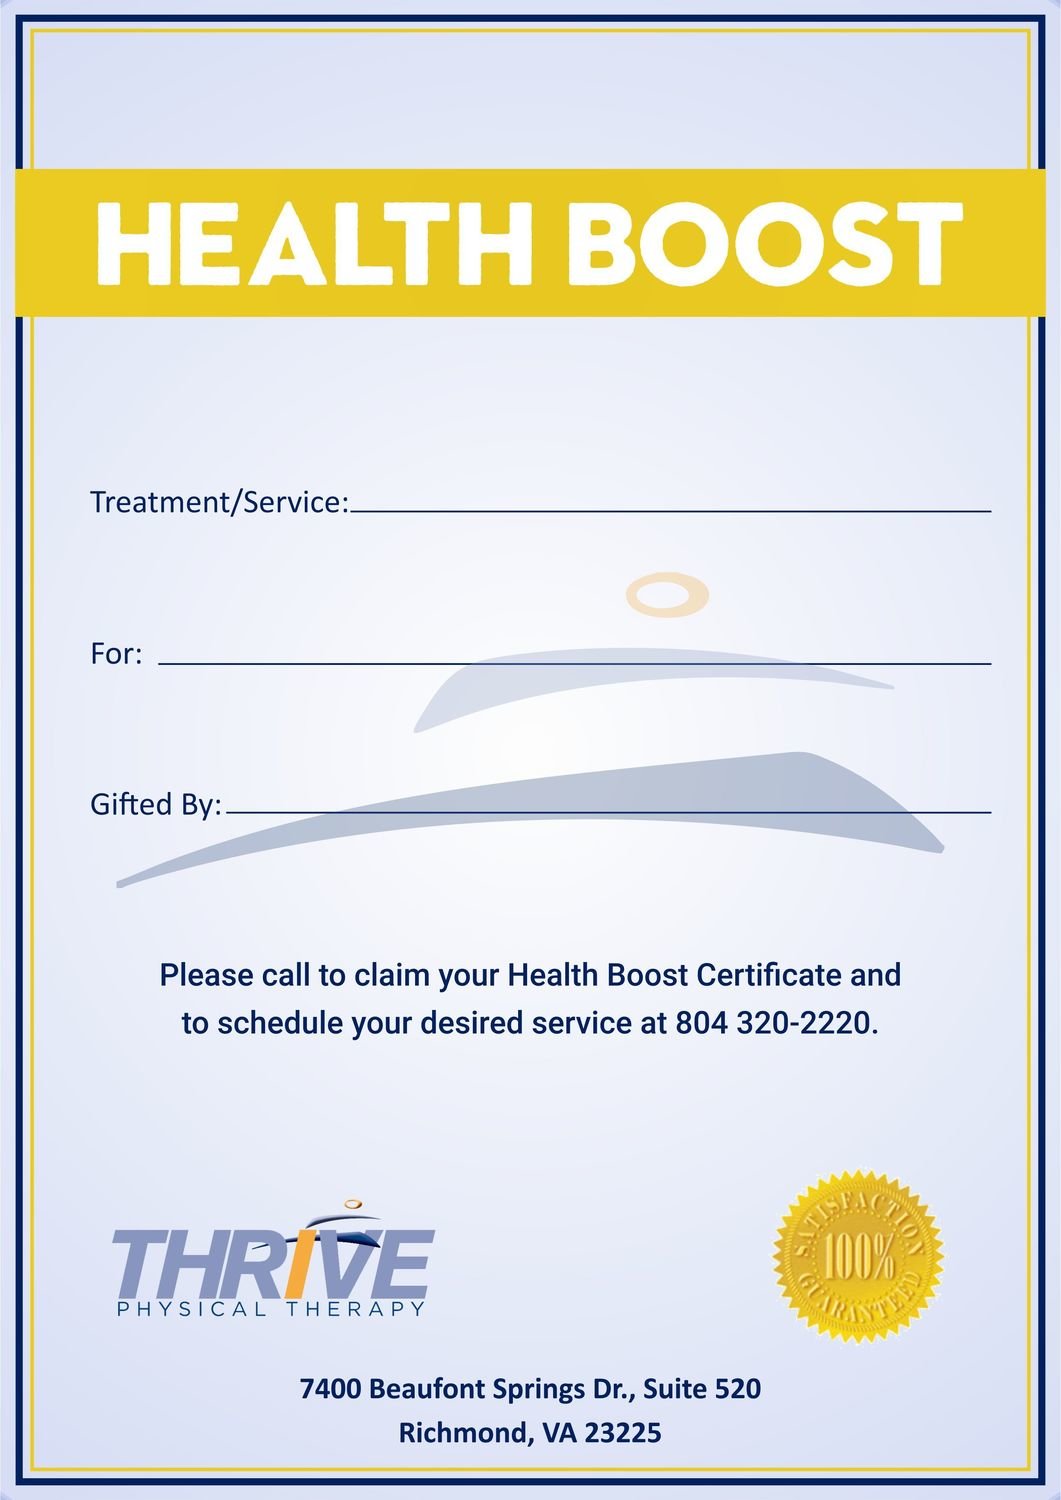 Health Boost Gift Certificate-Silver